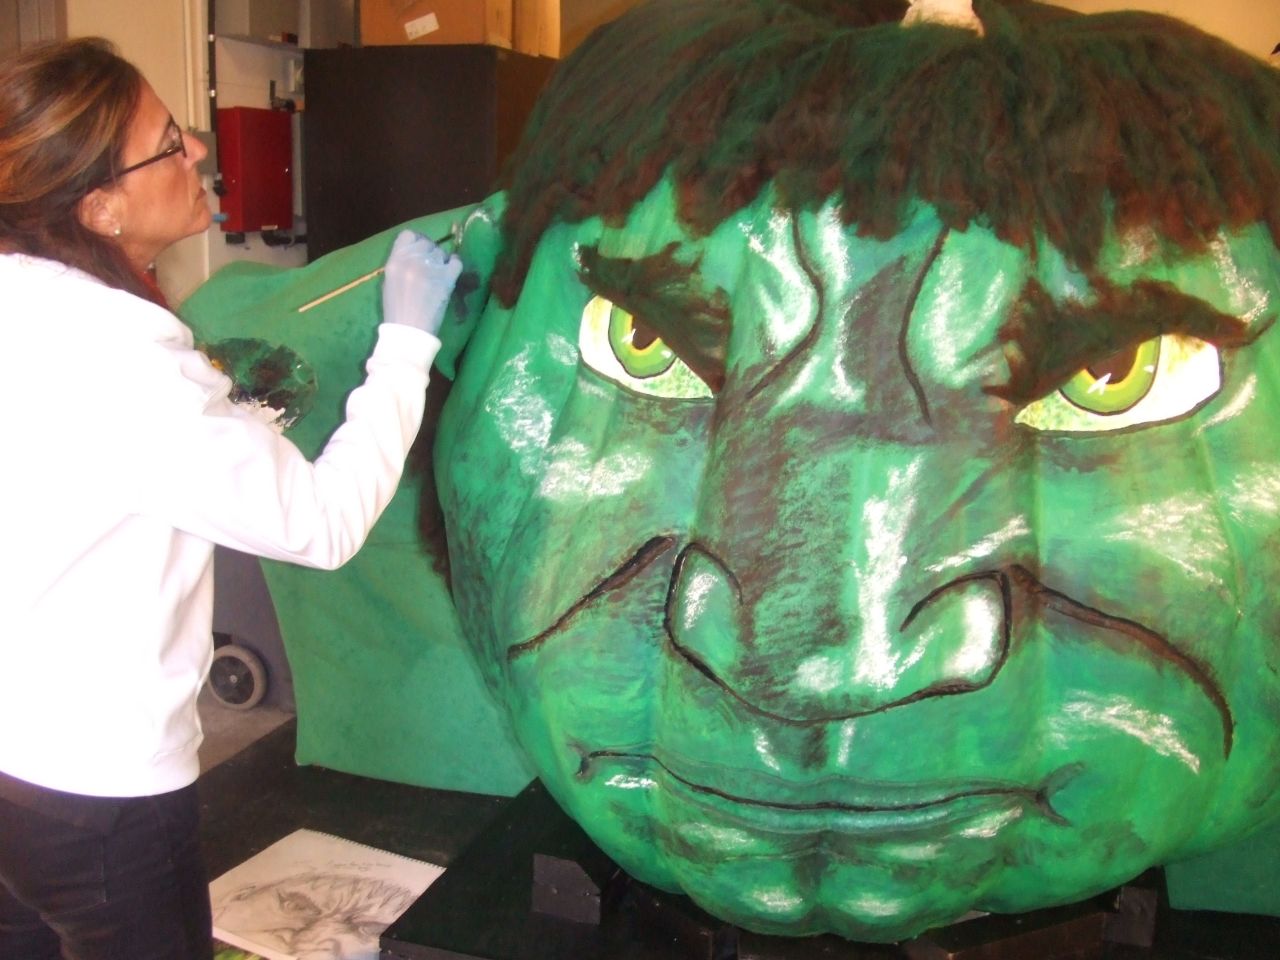 Paras sometimes creates pumpkin paintings for events, like this 746-pound rendition of The Hulk at former Ohio Gov. Ted Strickland's residence to promote green energy in 2010.